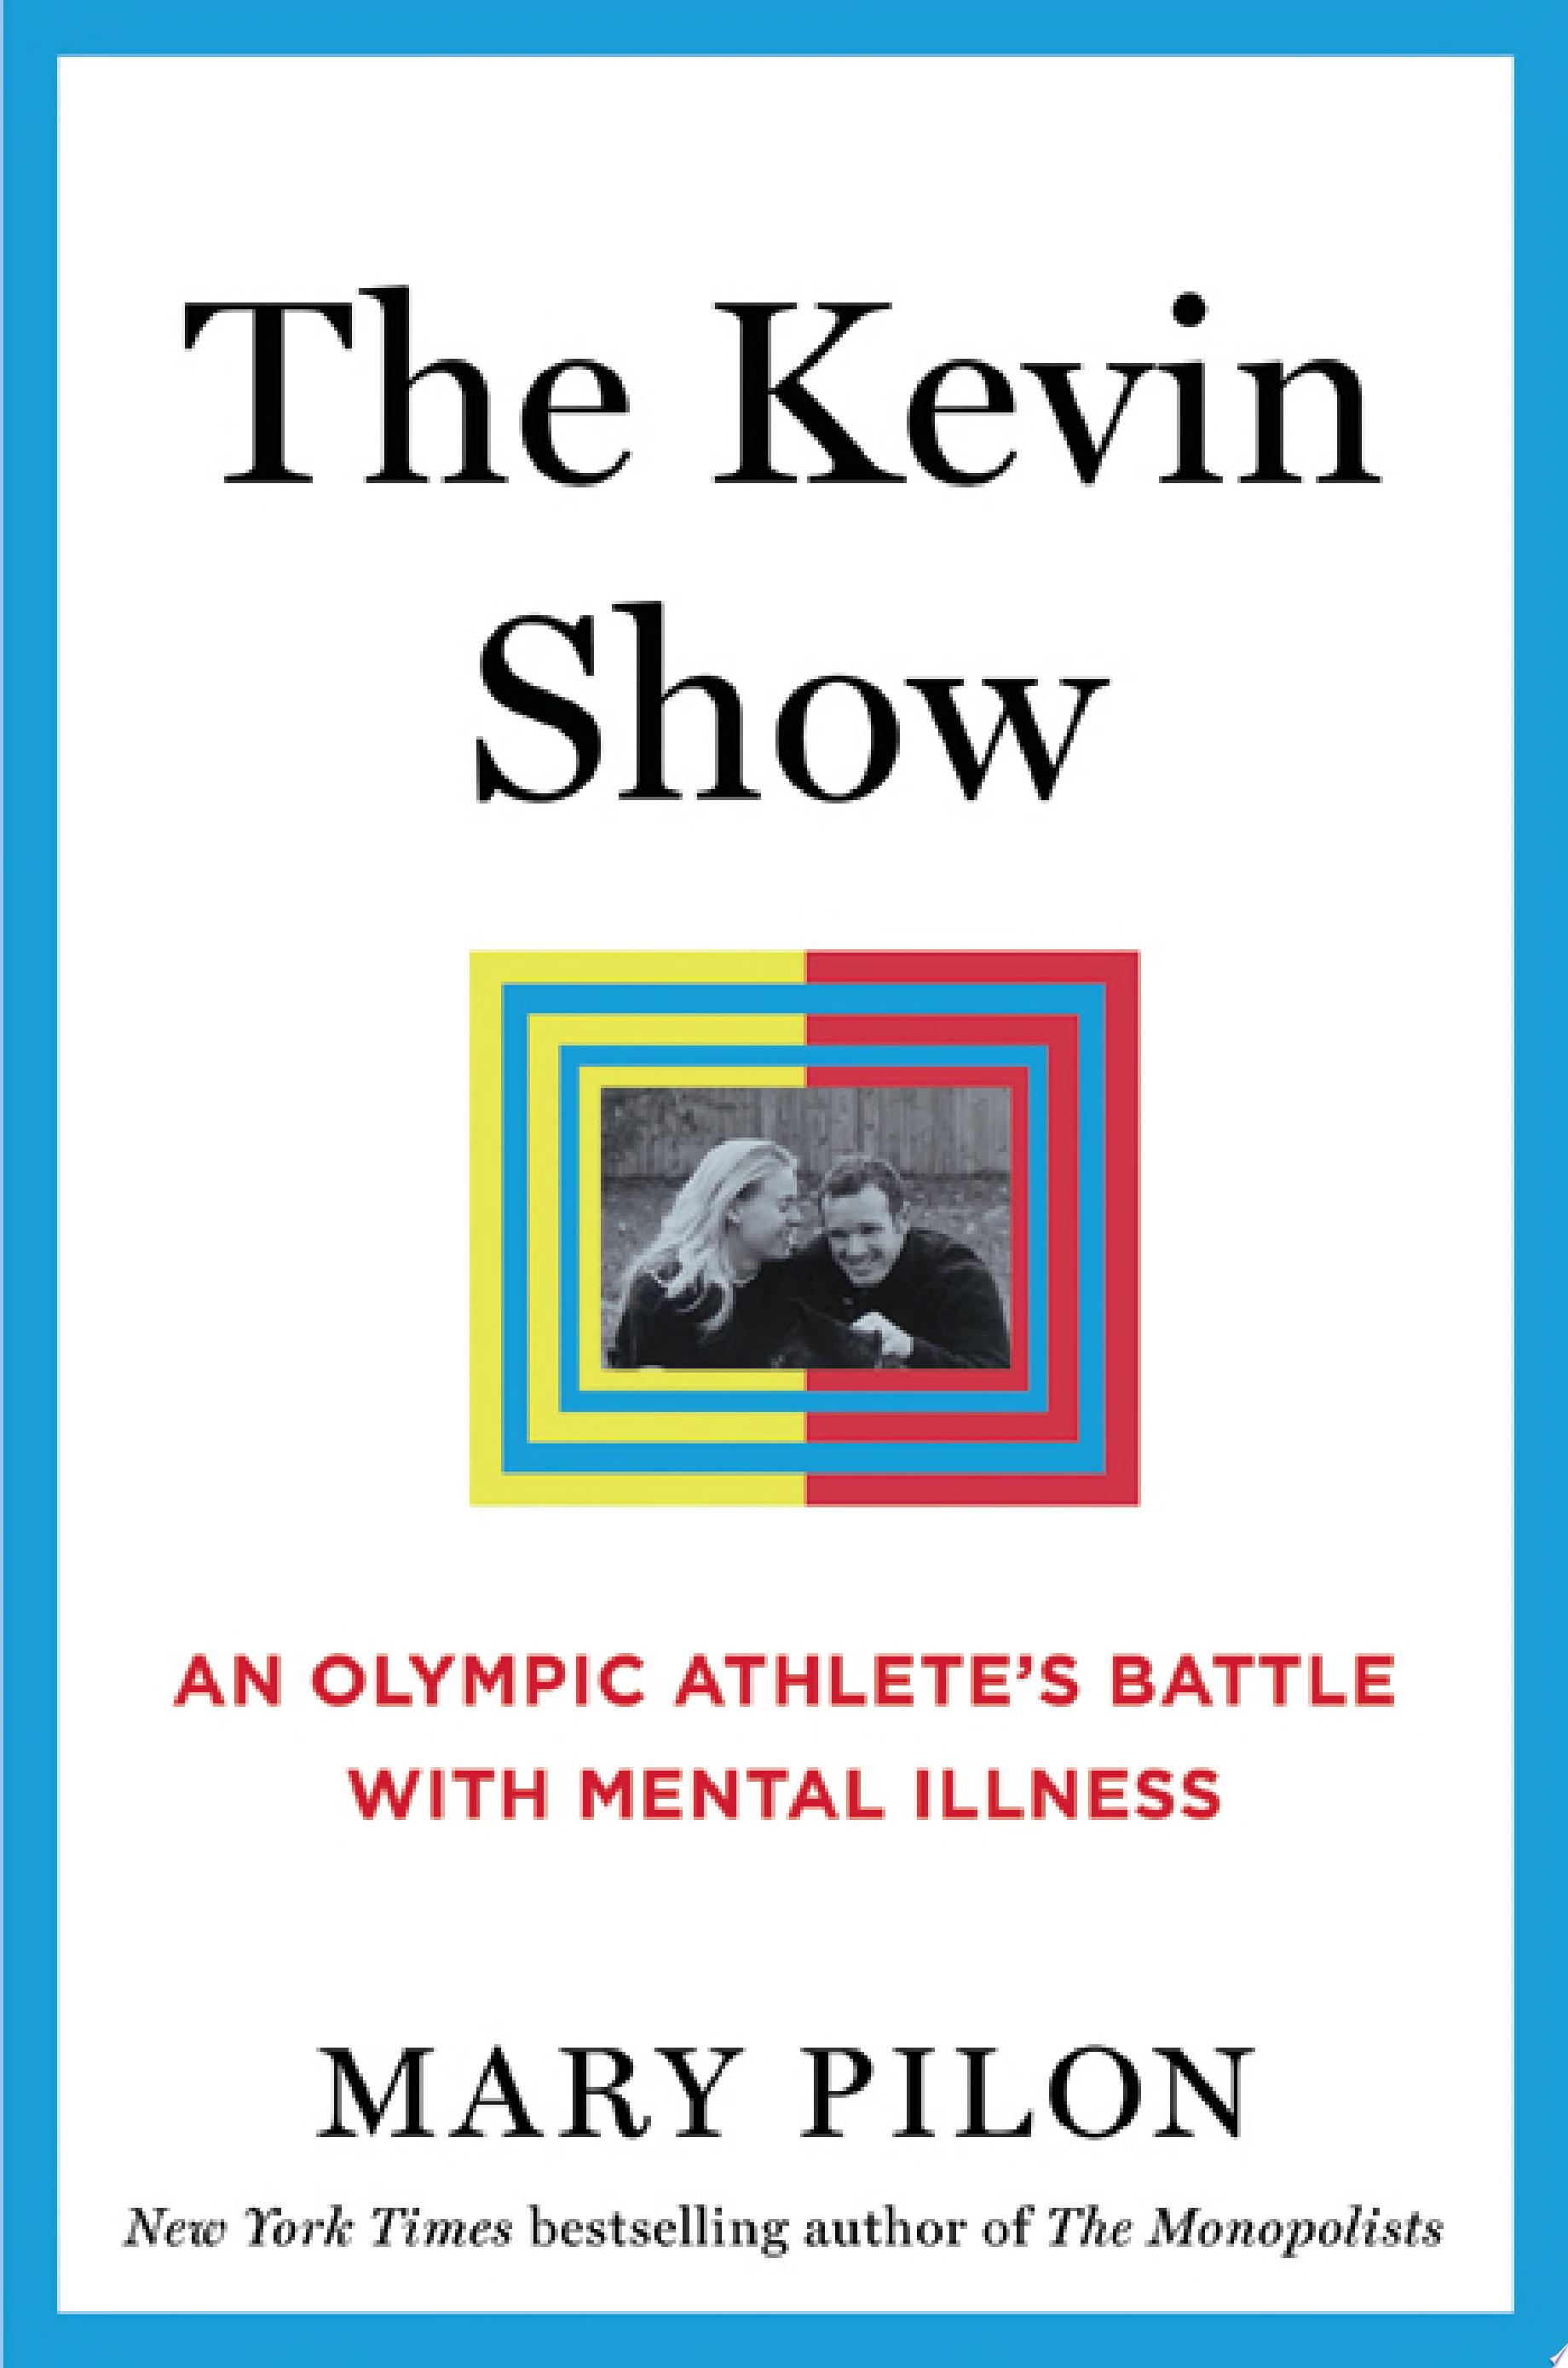 Image for "The Kevin Show"